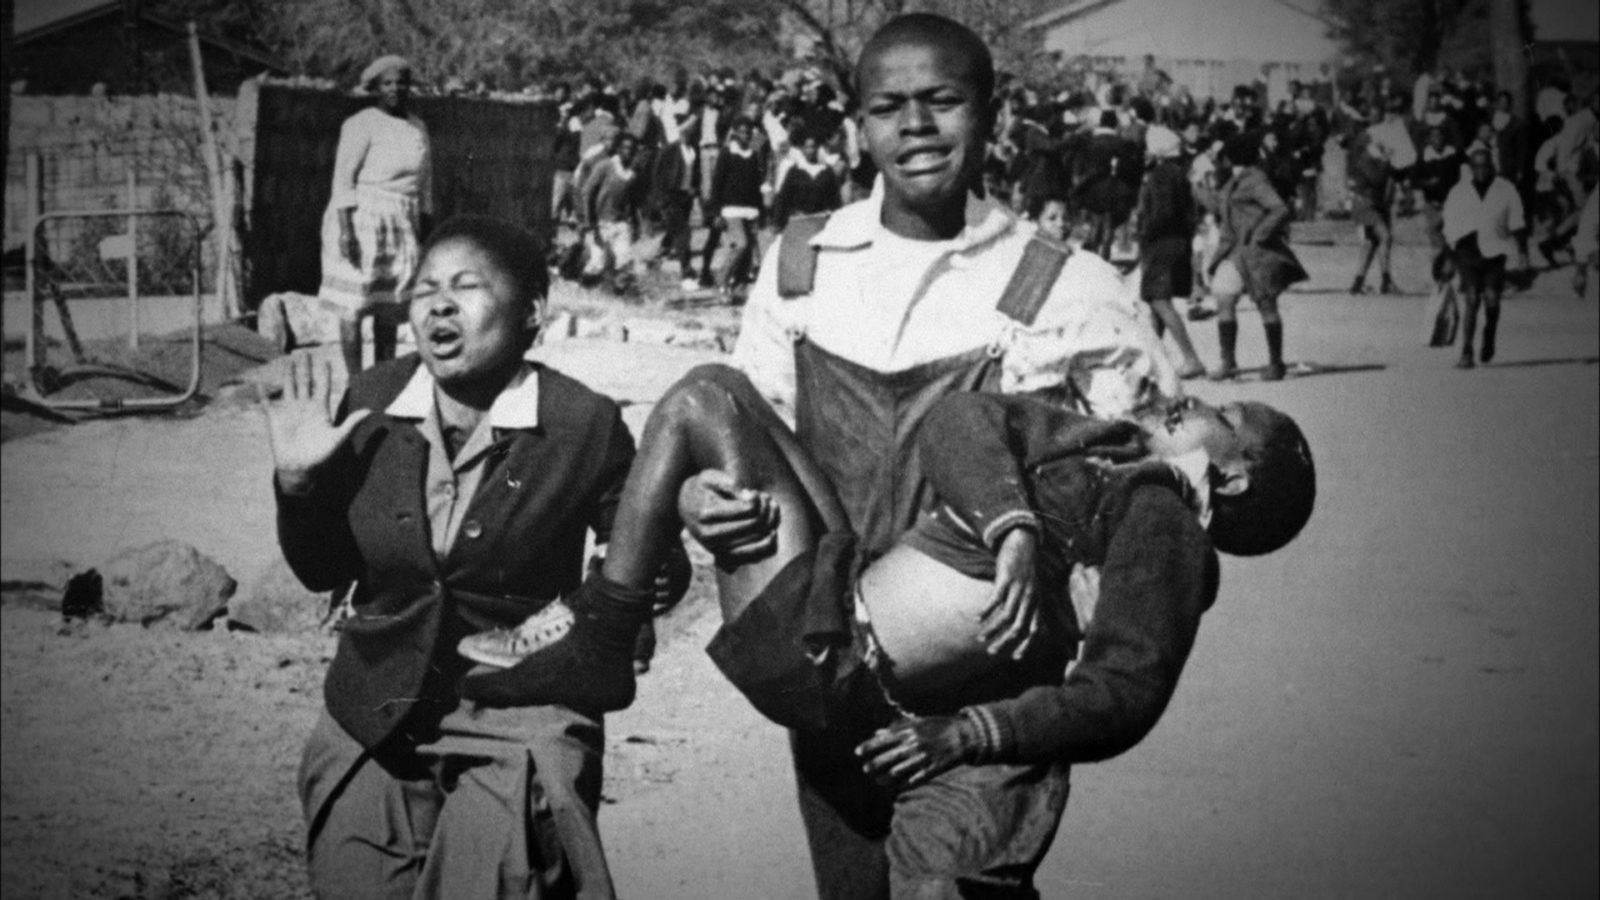 feature greeks the soweto uprising saw people leaving south africa fearing a repeat of experiences elsewhere